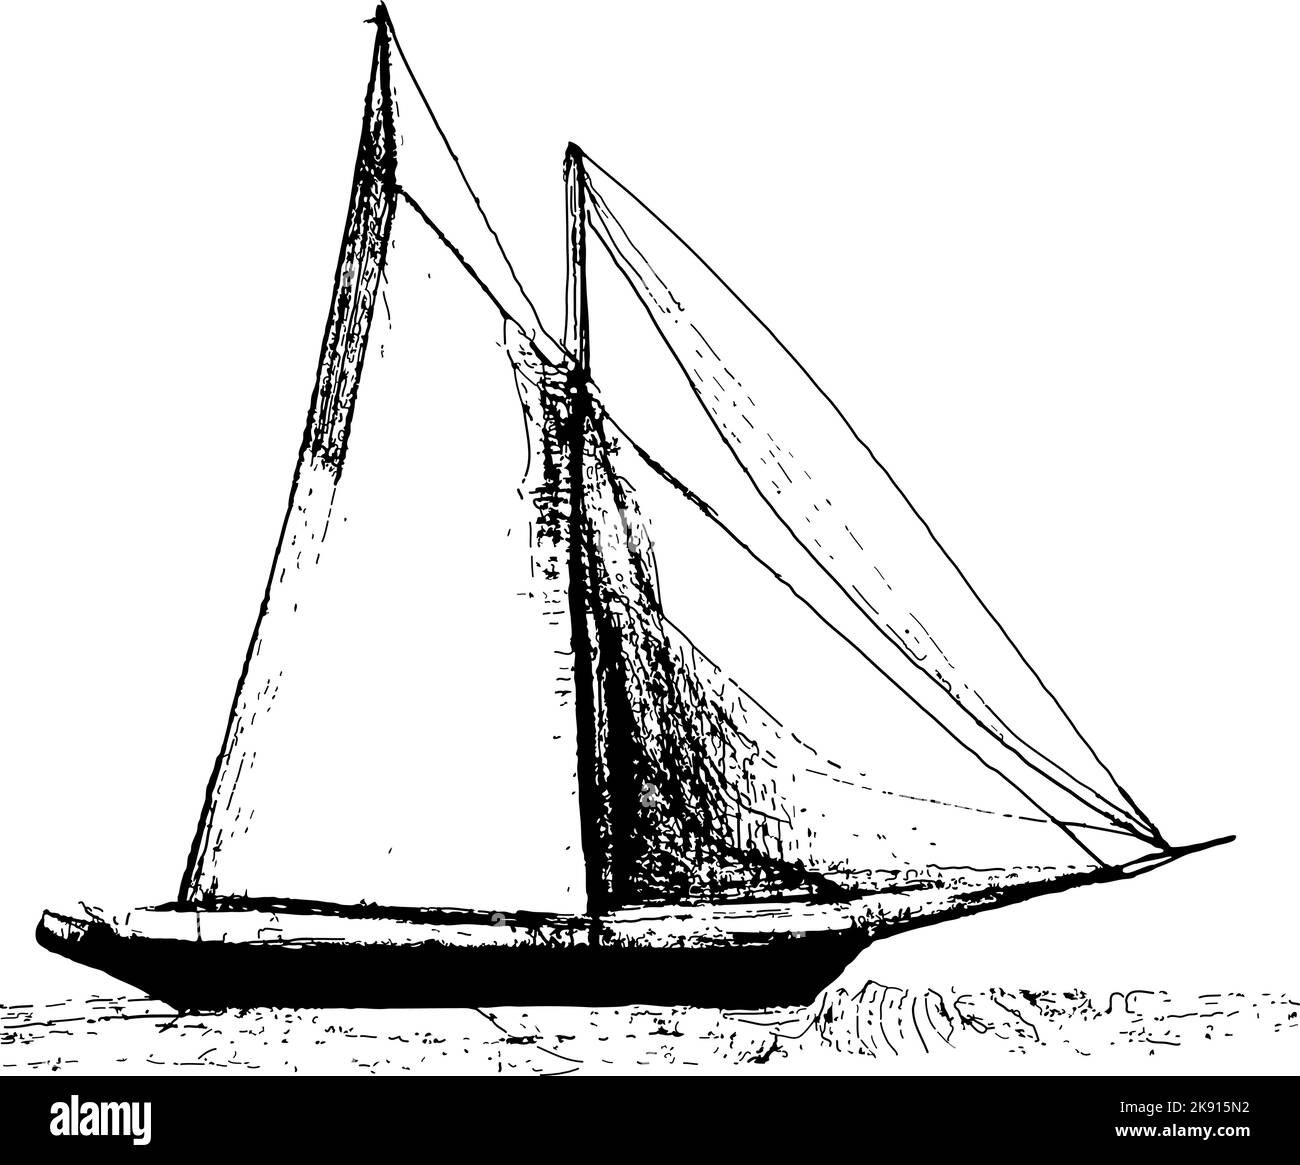 Sailboat line drawing original art work. Black and white scooner or cutter with two masts. Stock Vector